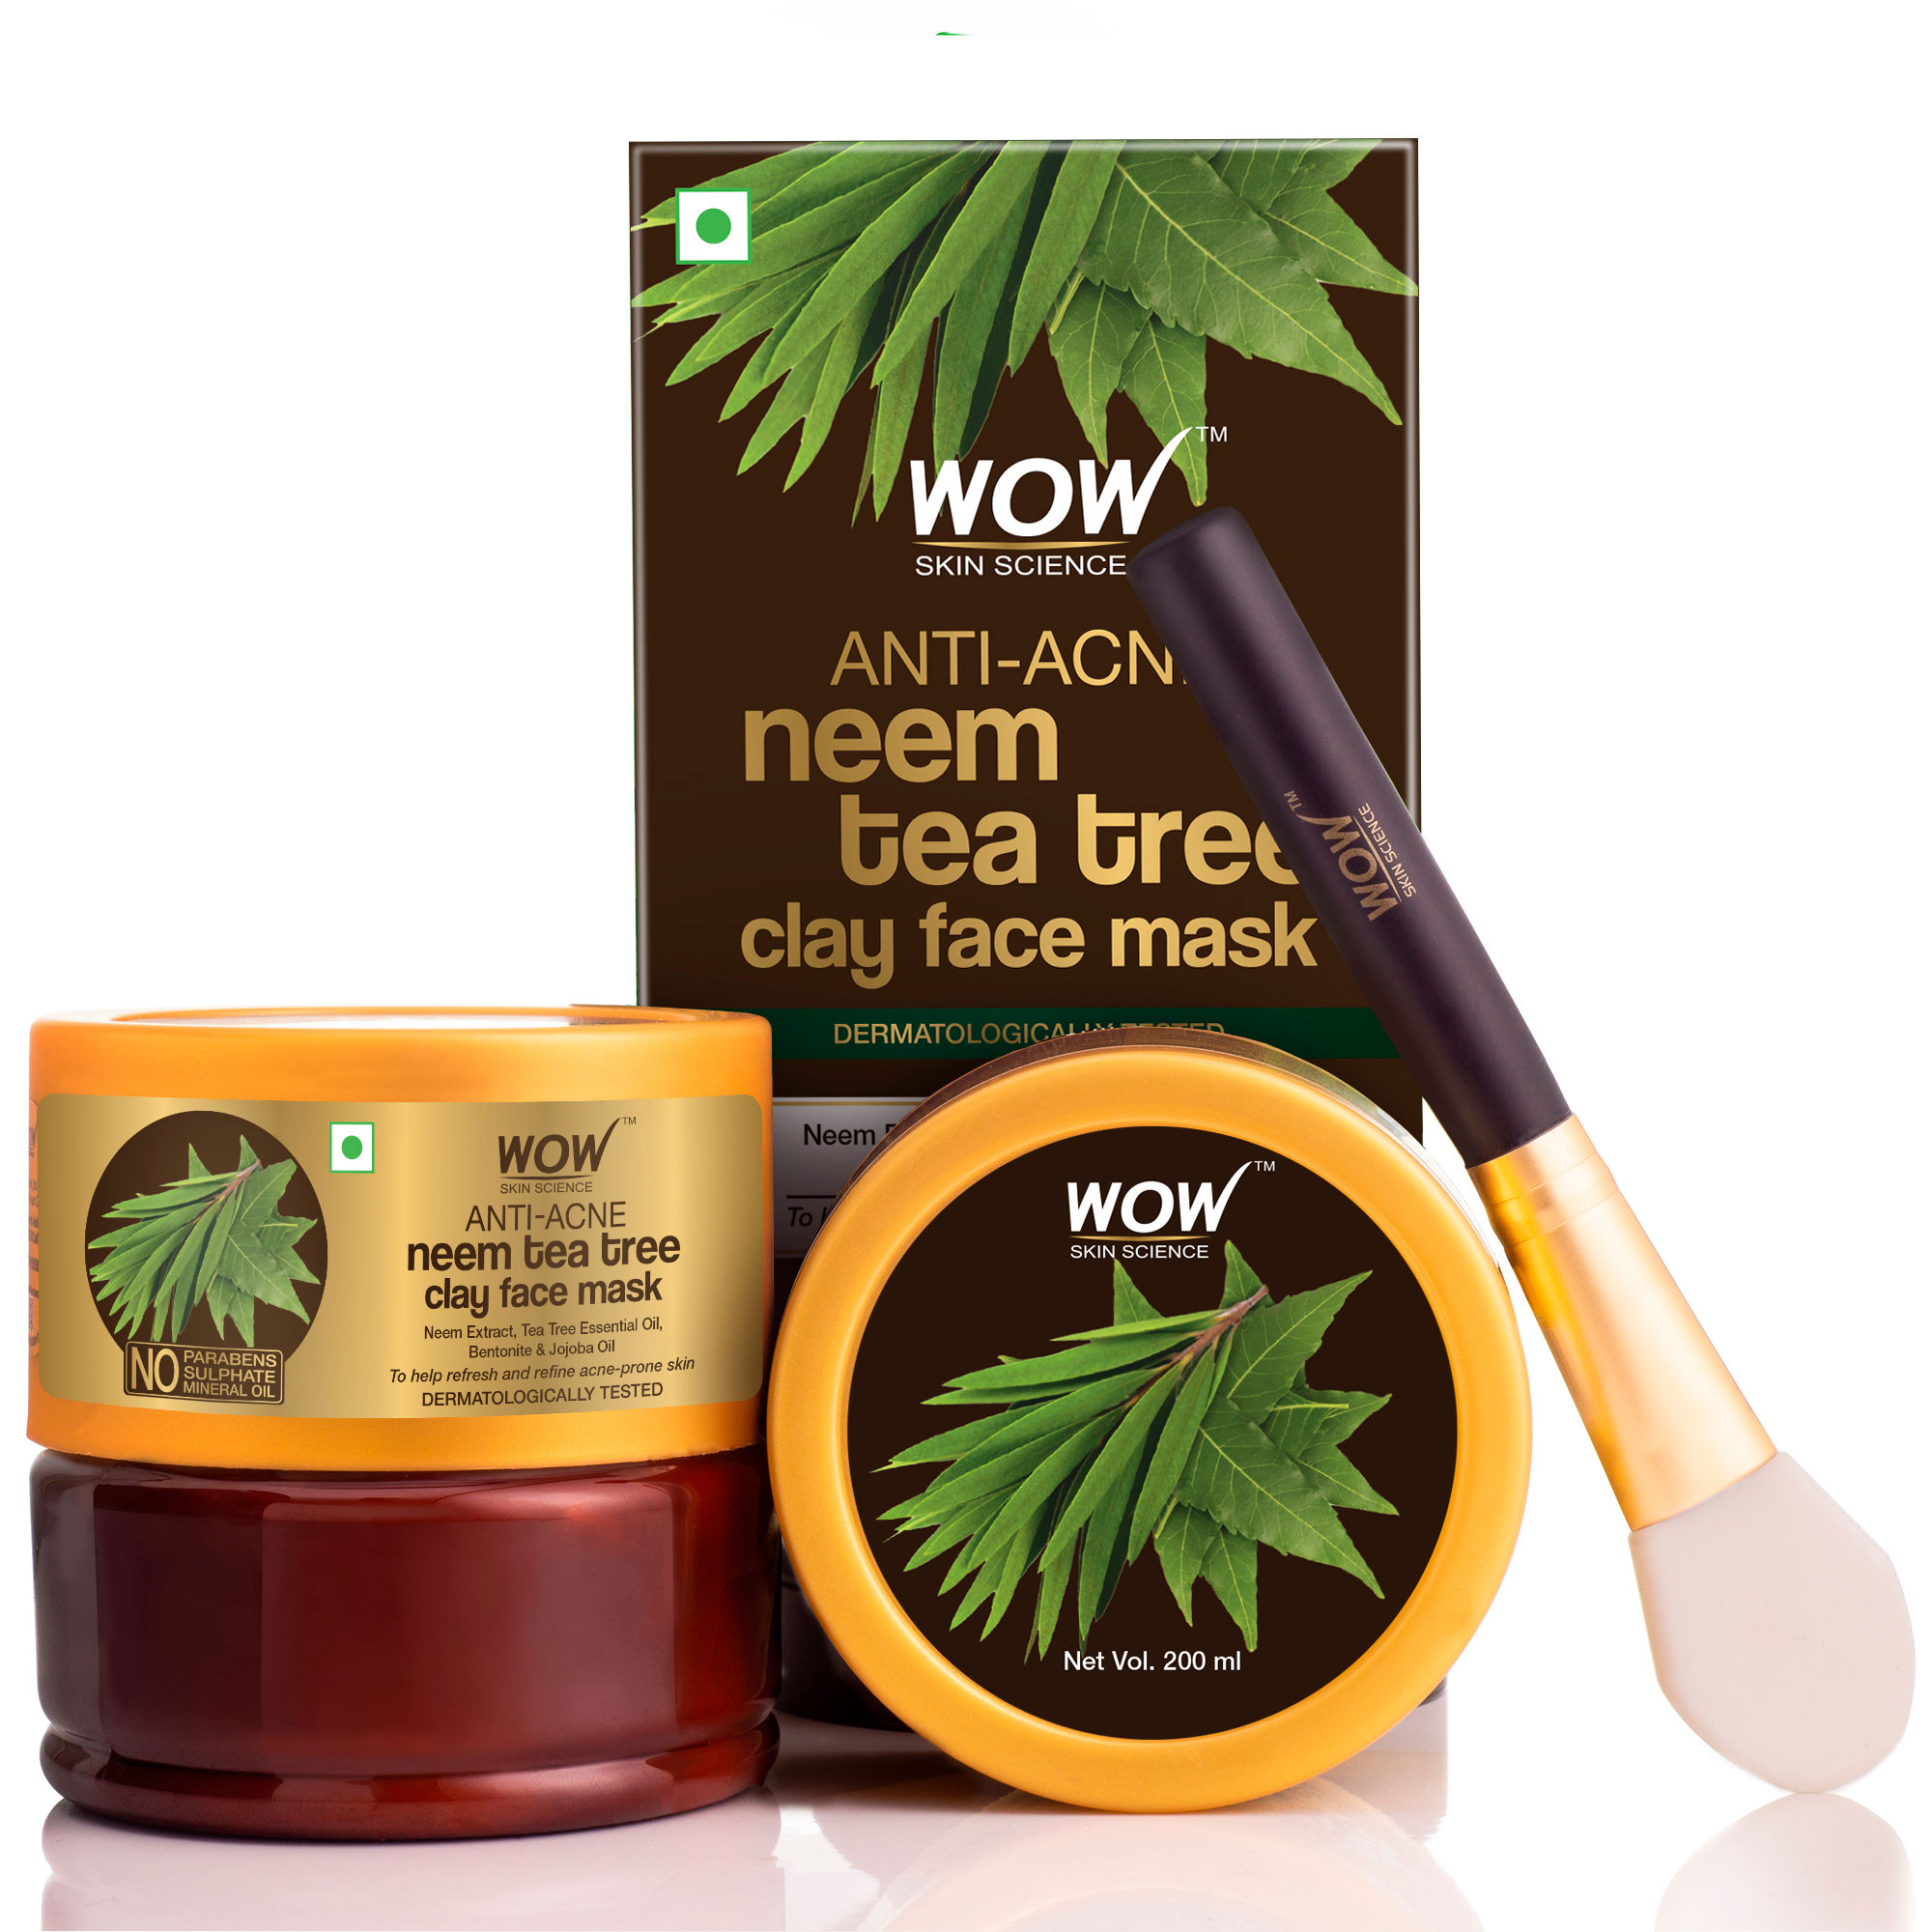 WOW Skin Anti-Acne Neem & Tea Tree Clay Face Mask: WOW Skin Science Anti-Acne Neem & Tea Clay Face Mask Online at Best Price in India |